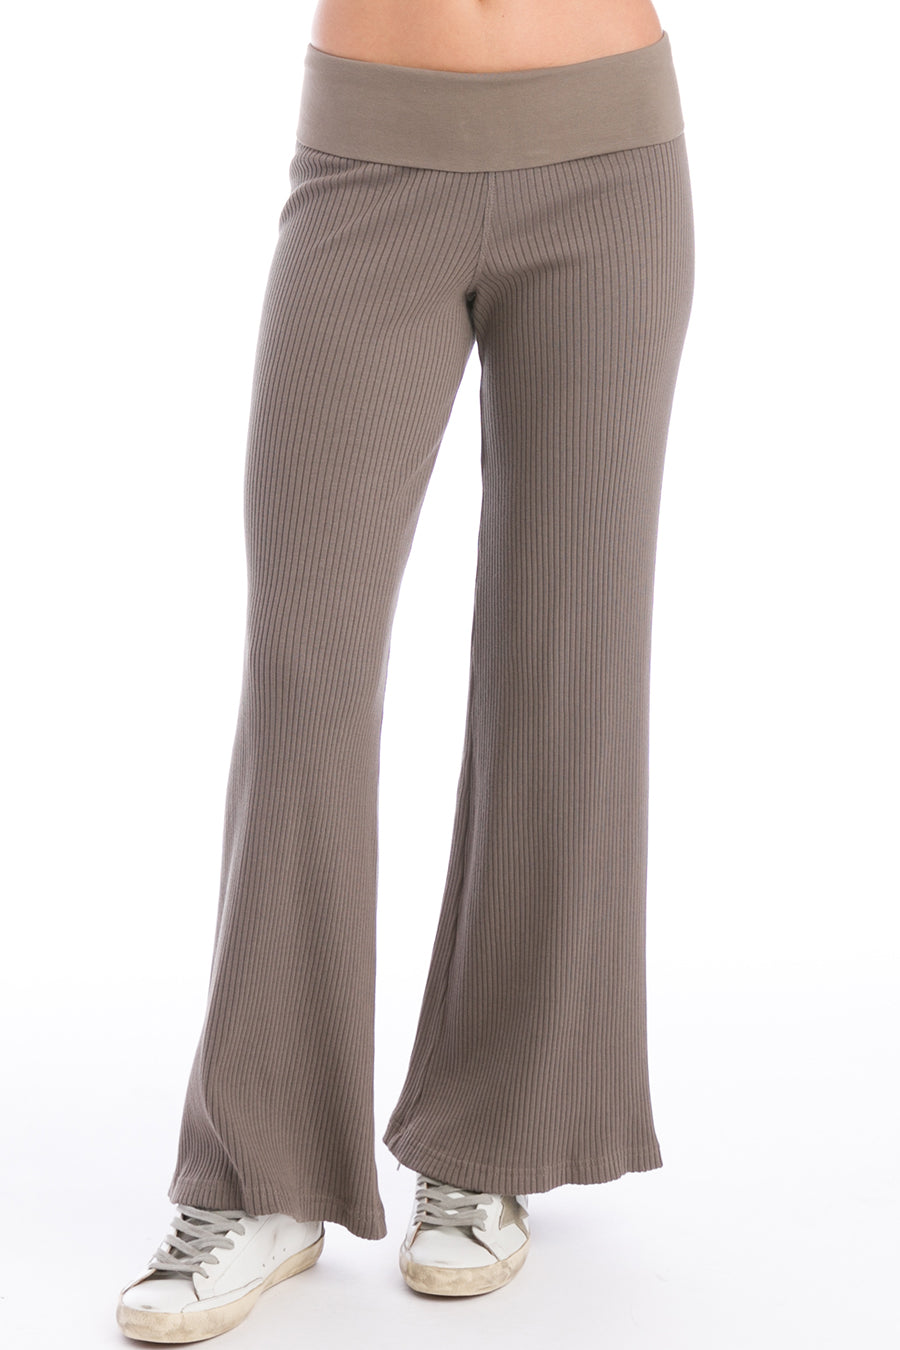 Hard Tail Contour Rolldown Bootleg Flare Pant at  - Free  Shipping